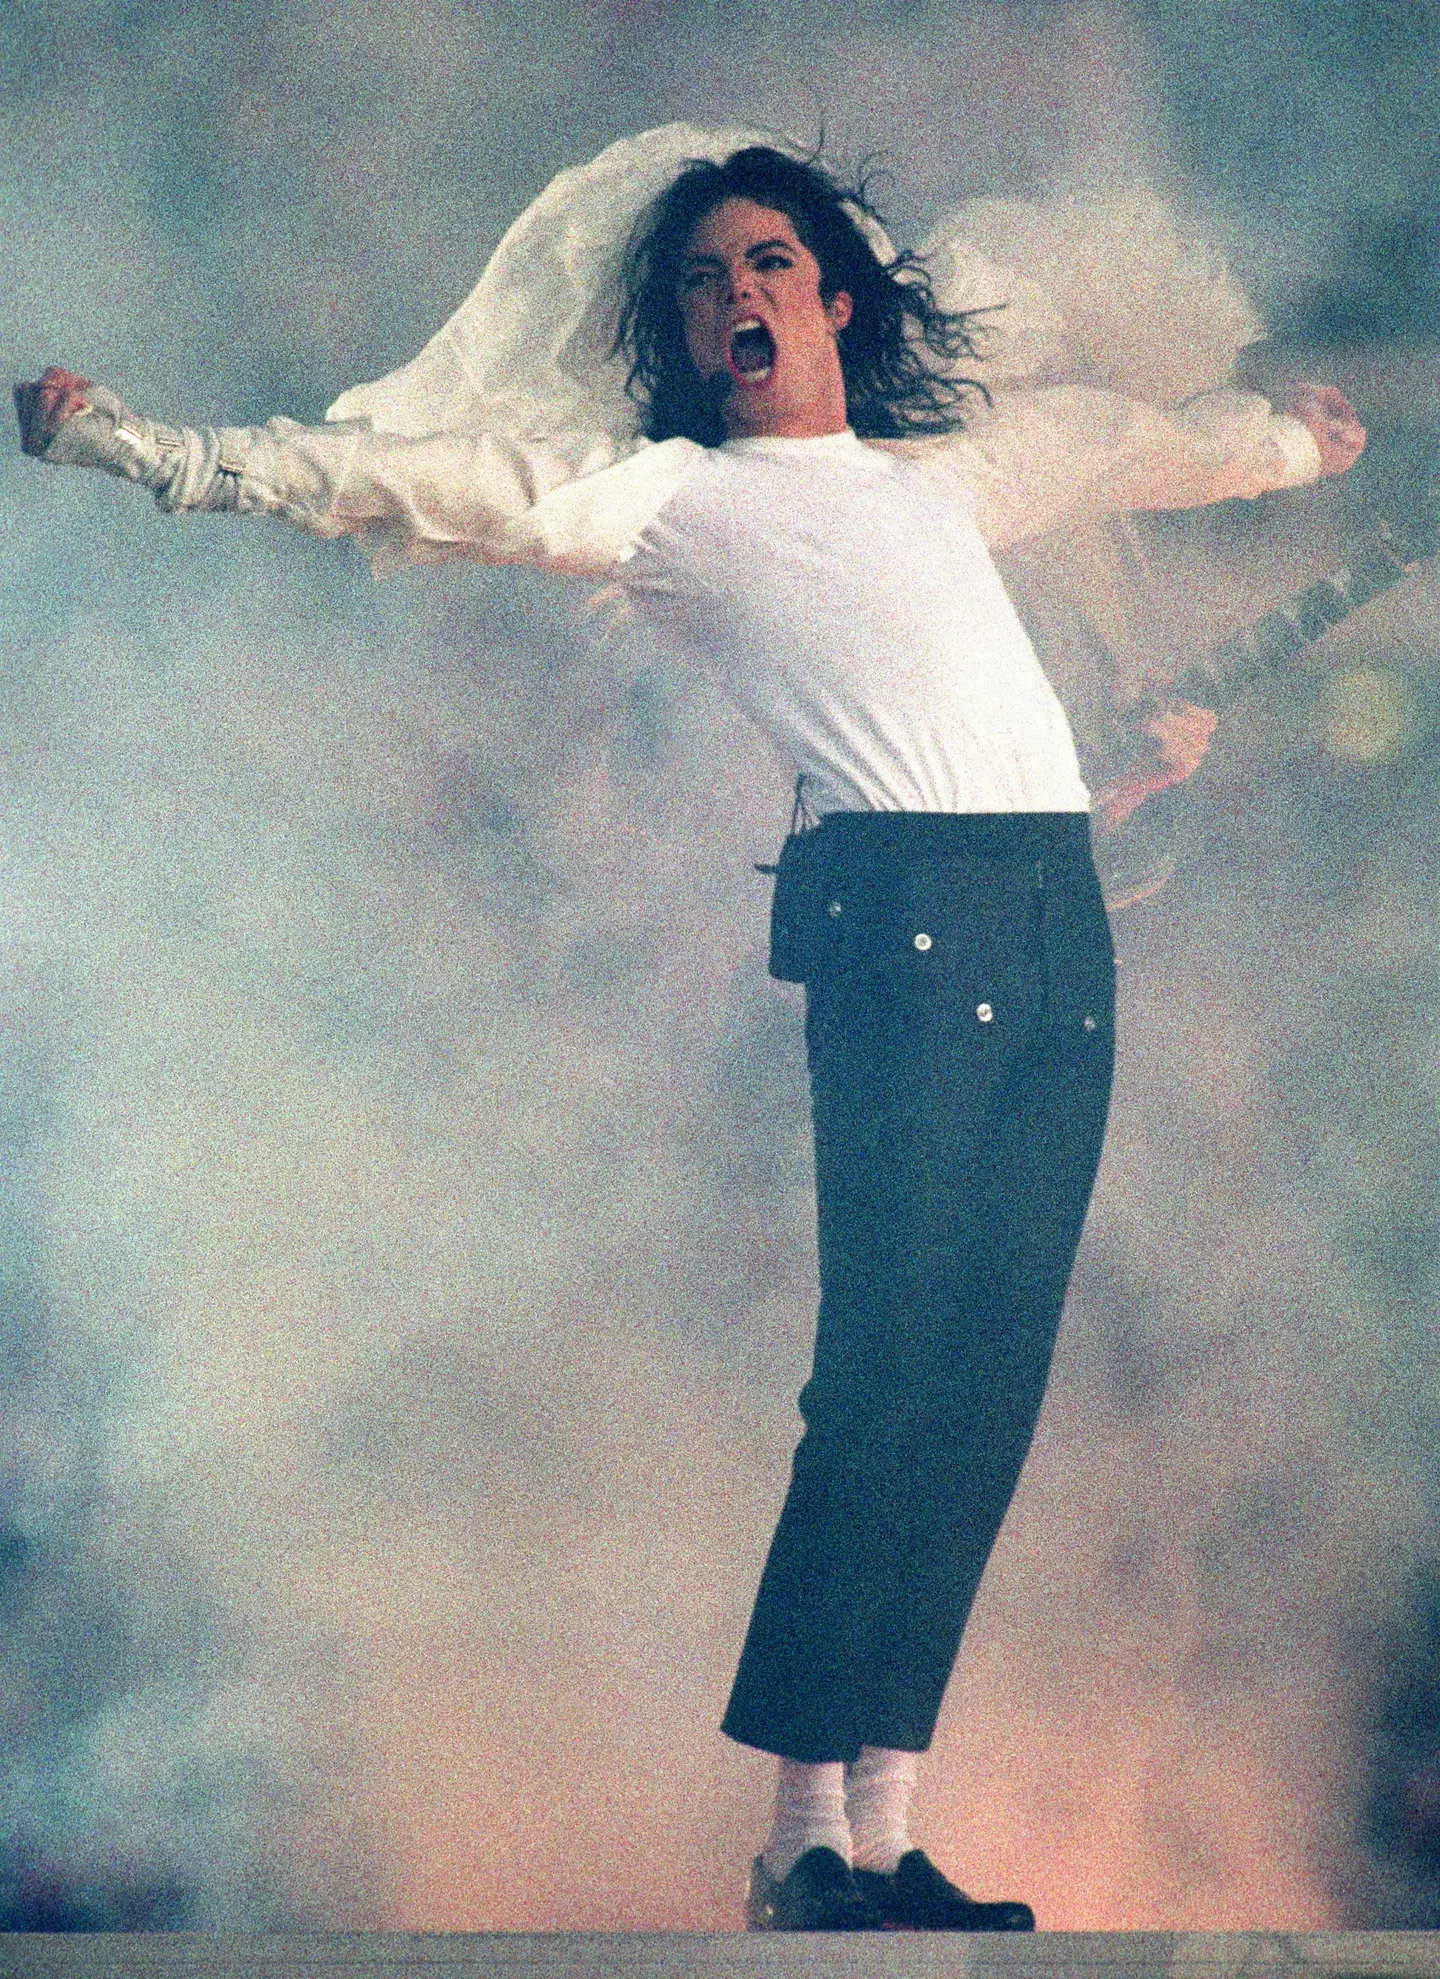 Michael Jackson definitely has a strong body of work.